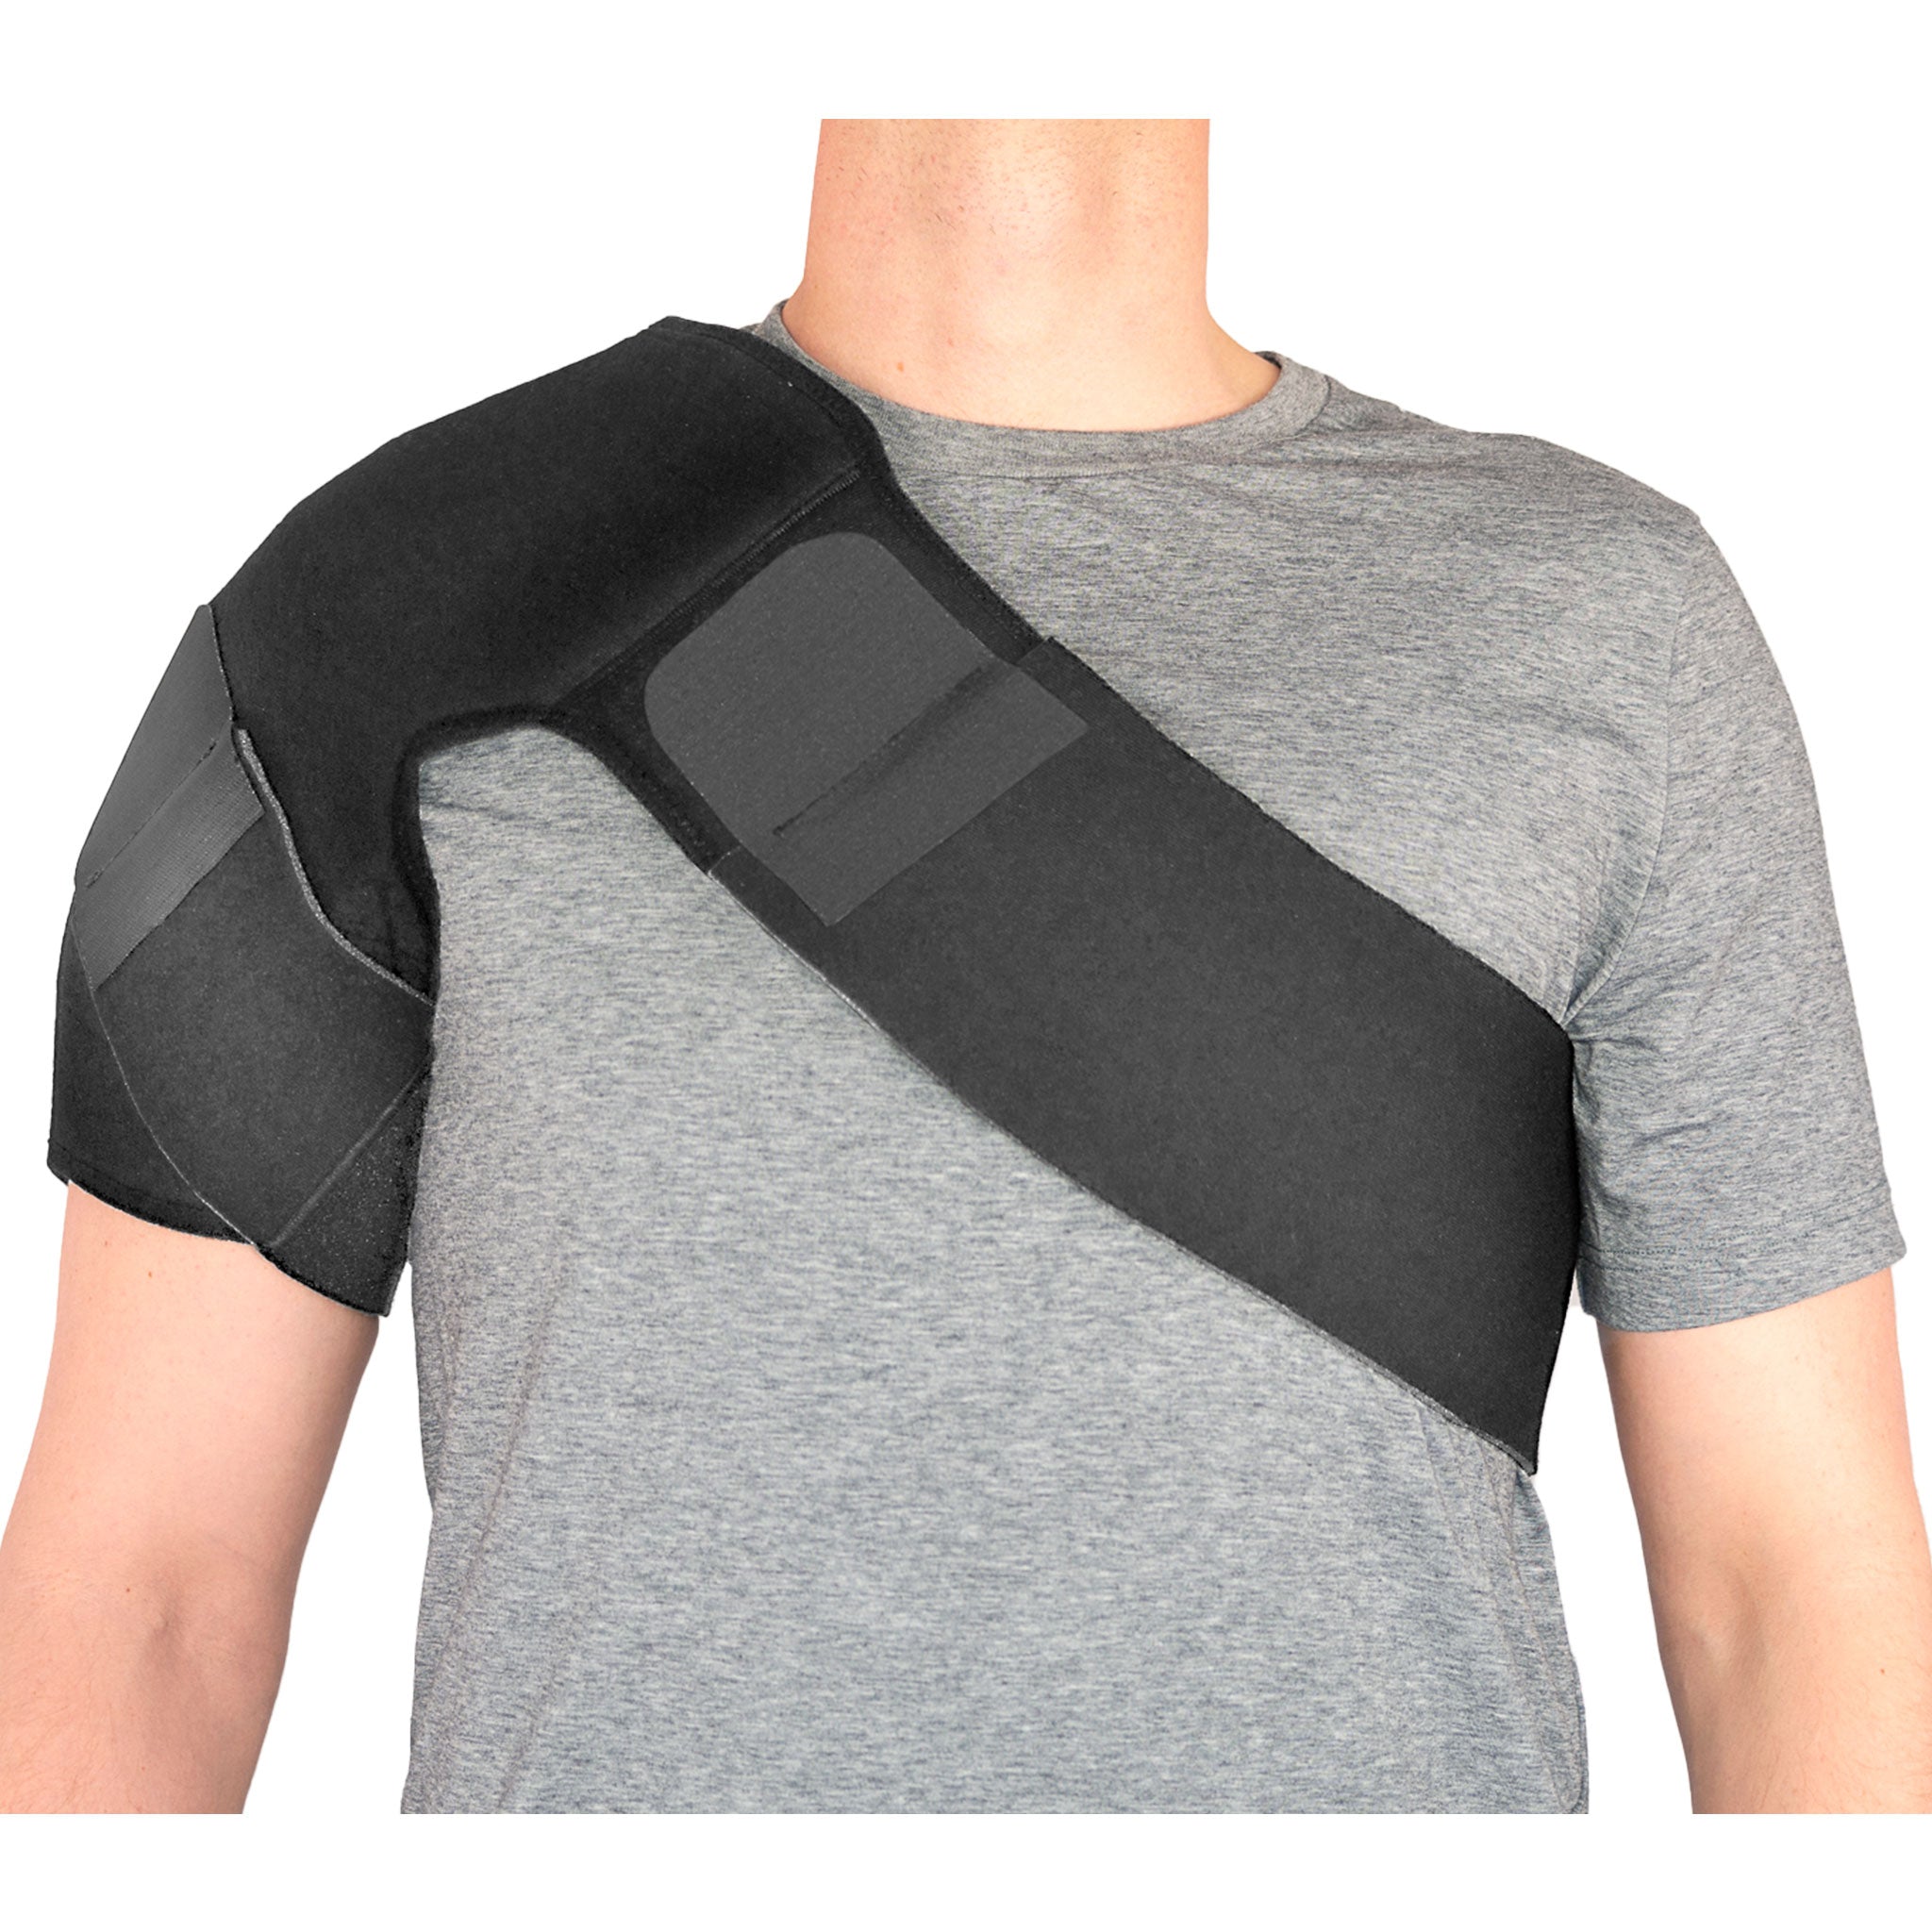 Universal Shoulder Compression Therapy System – Ezy Wrap